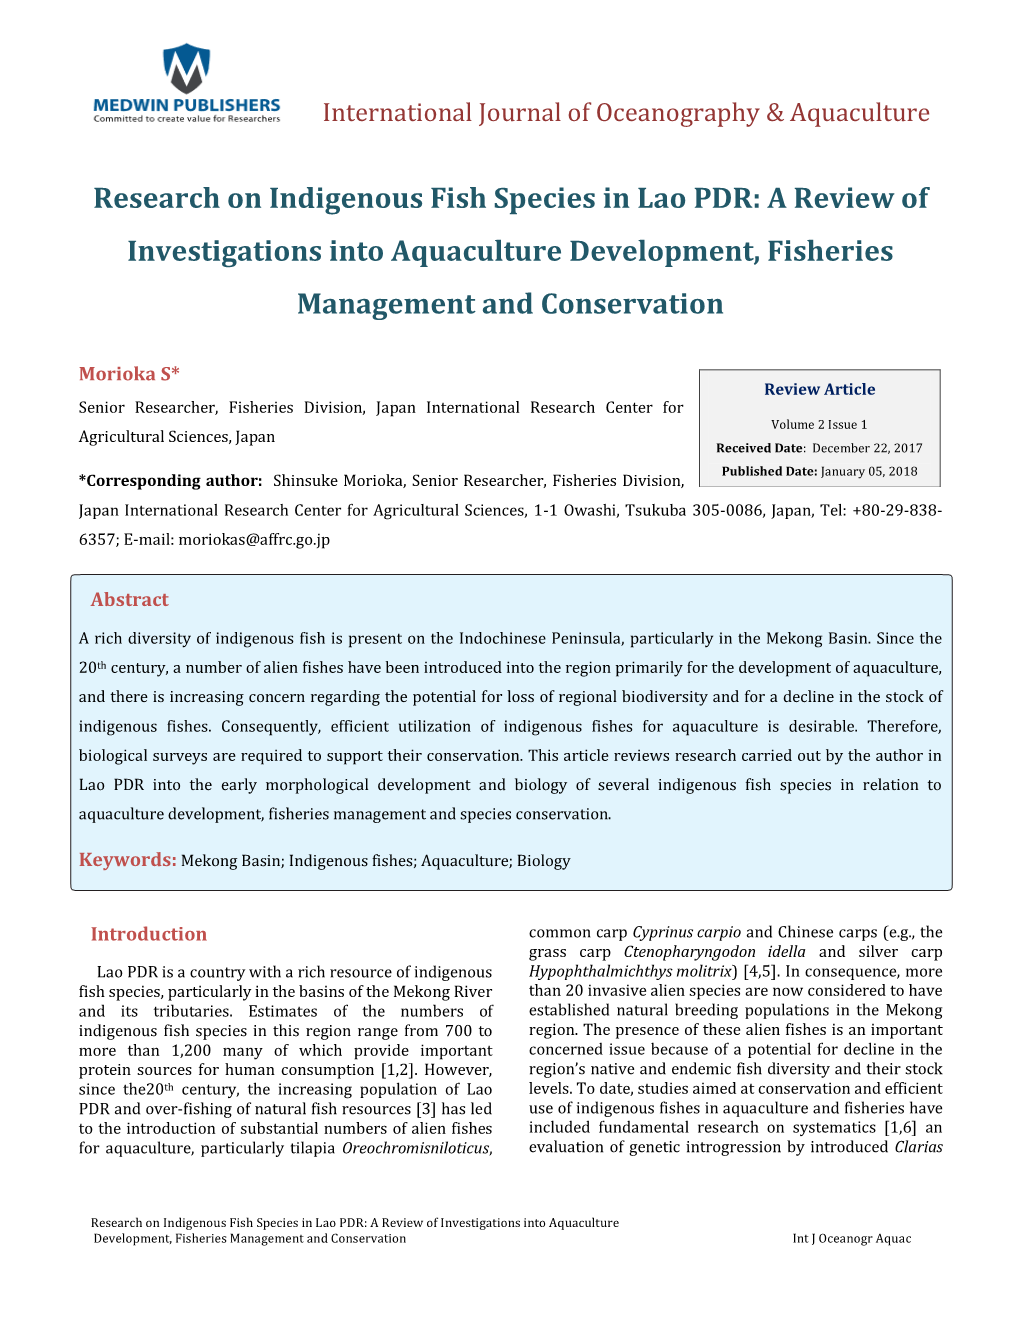 Research on Indigenous Fish Species in Lao PDR: a Review of Investigations Into Aquaculture Development, Fisheries Management and Conservation